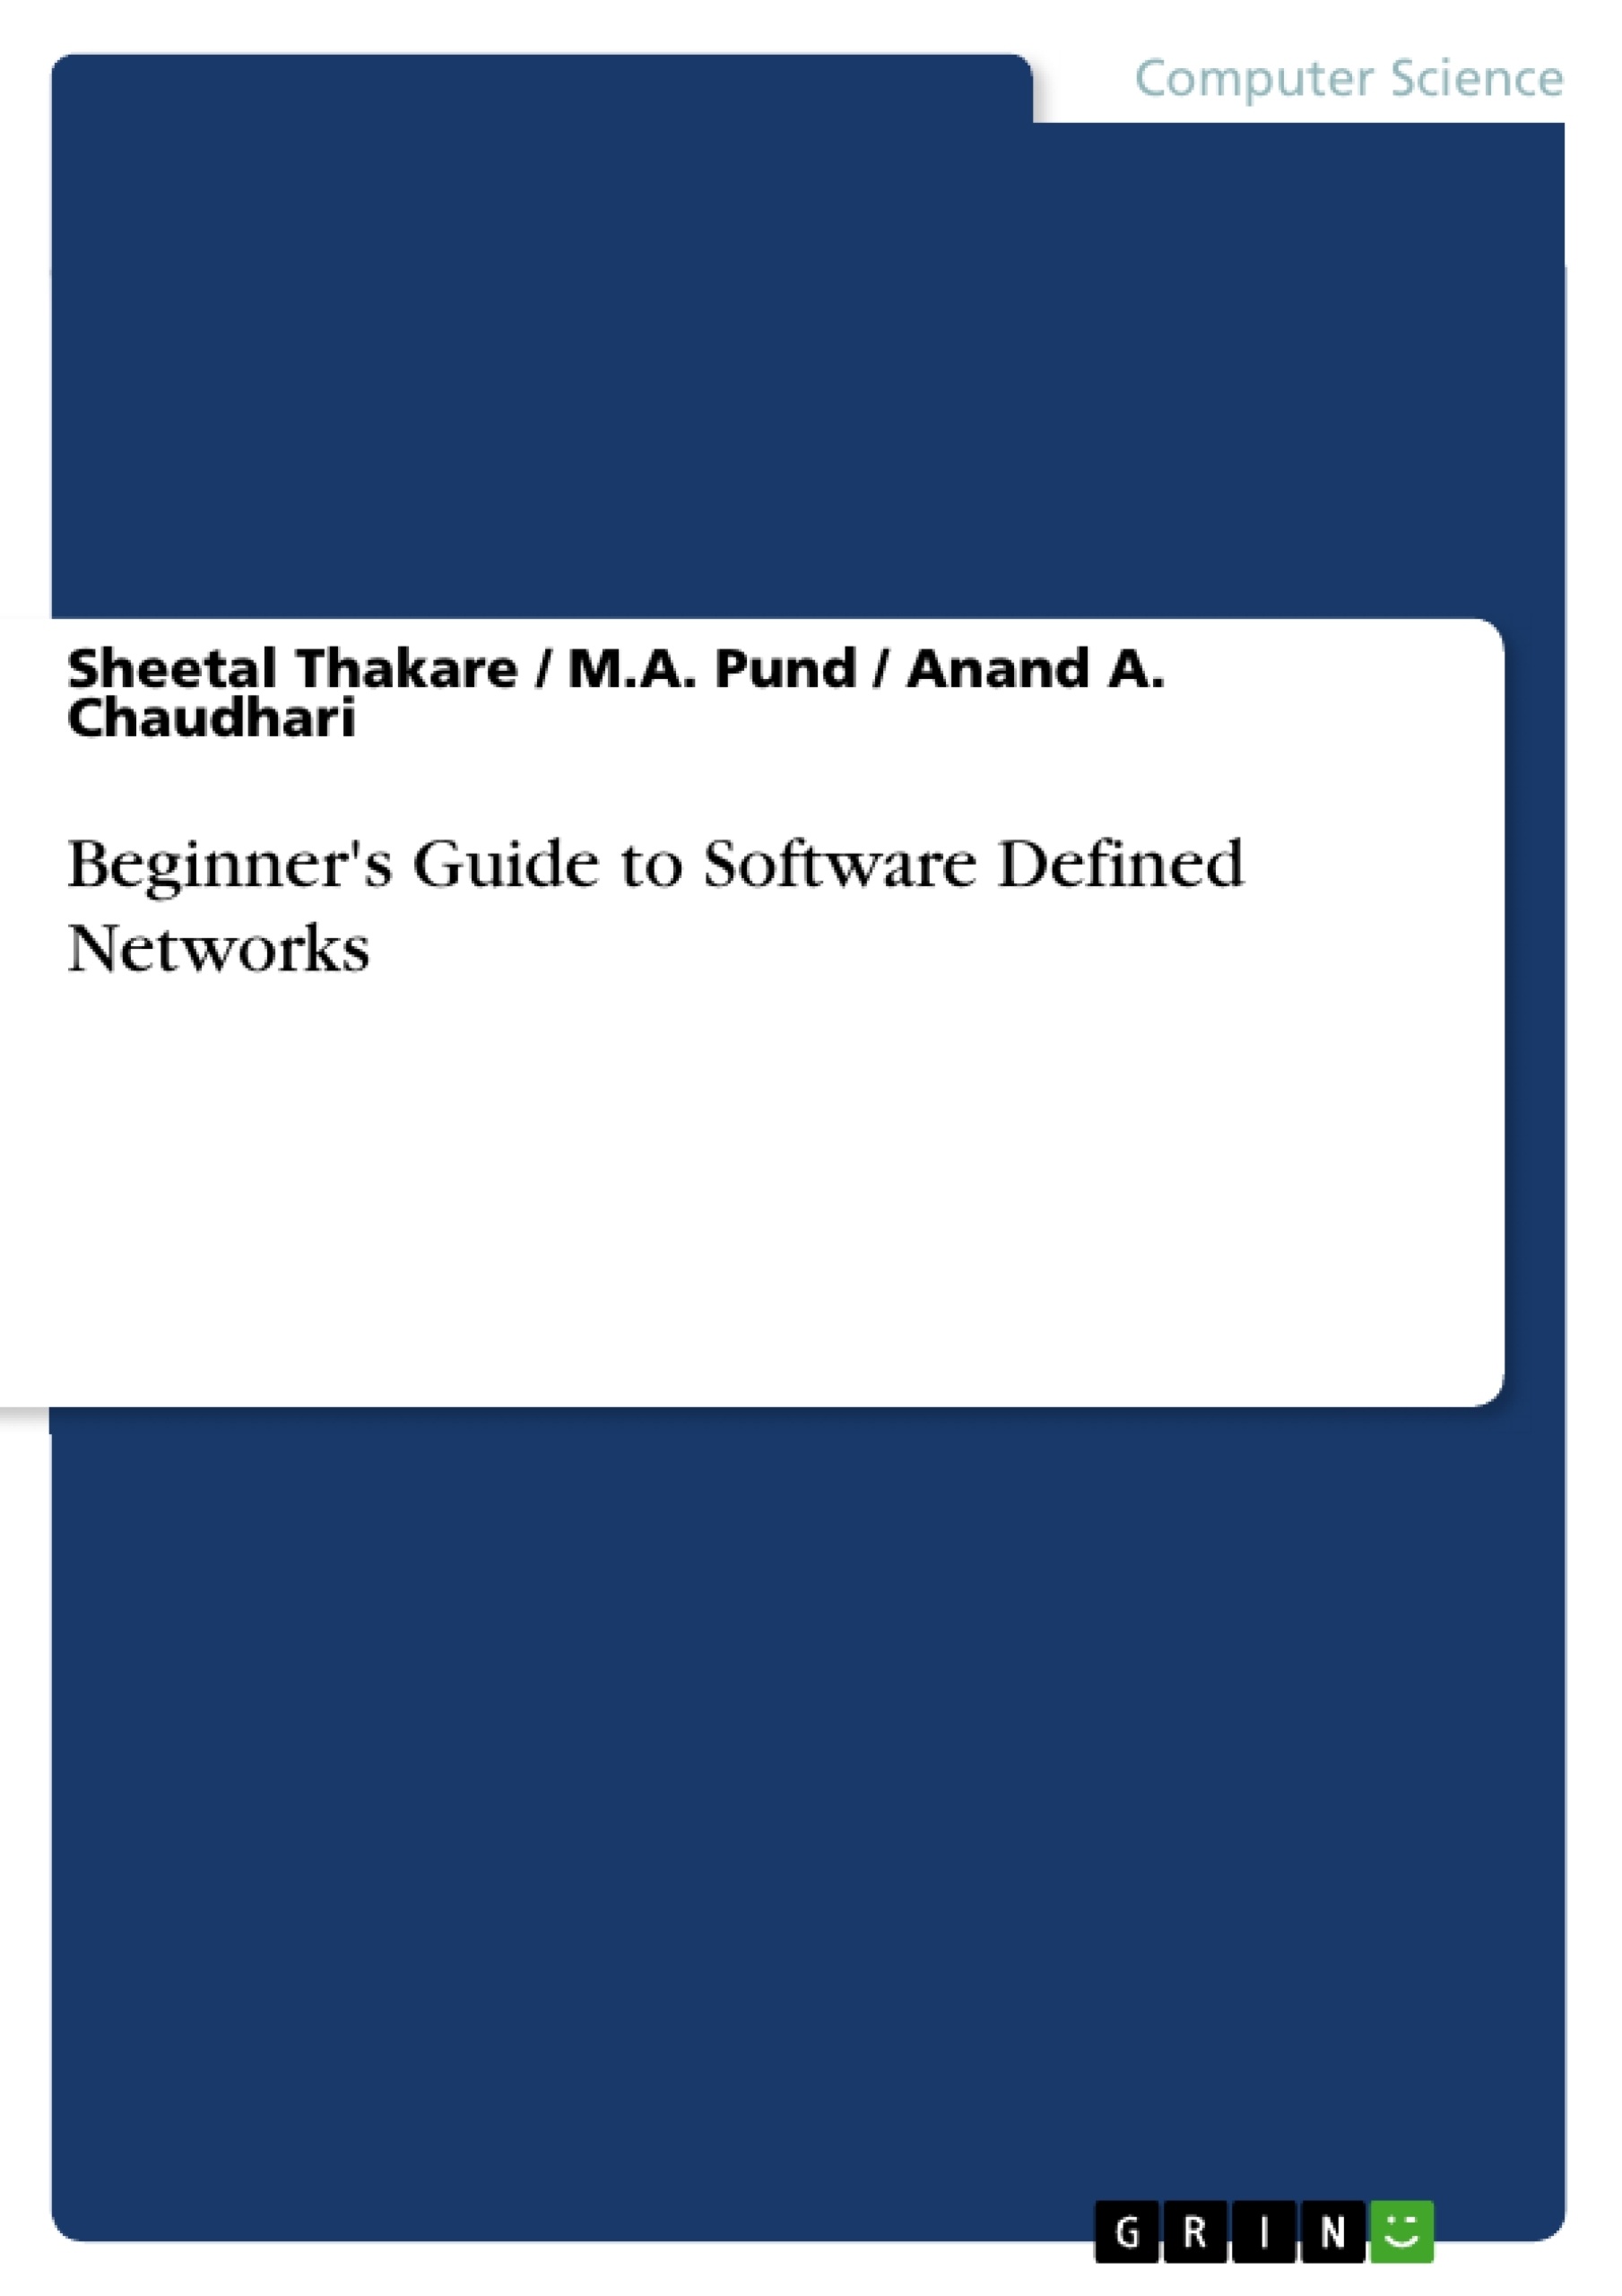 Titre: Beginner's Guide to Software Defined Networks